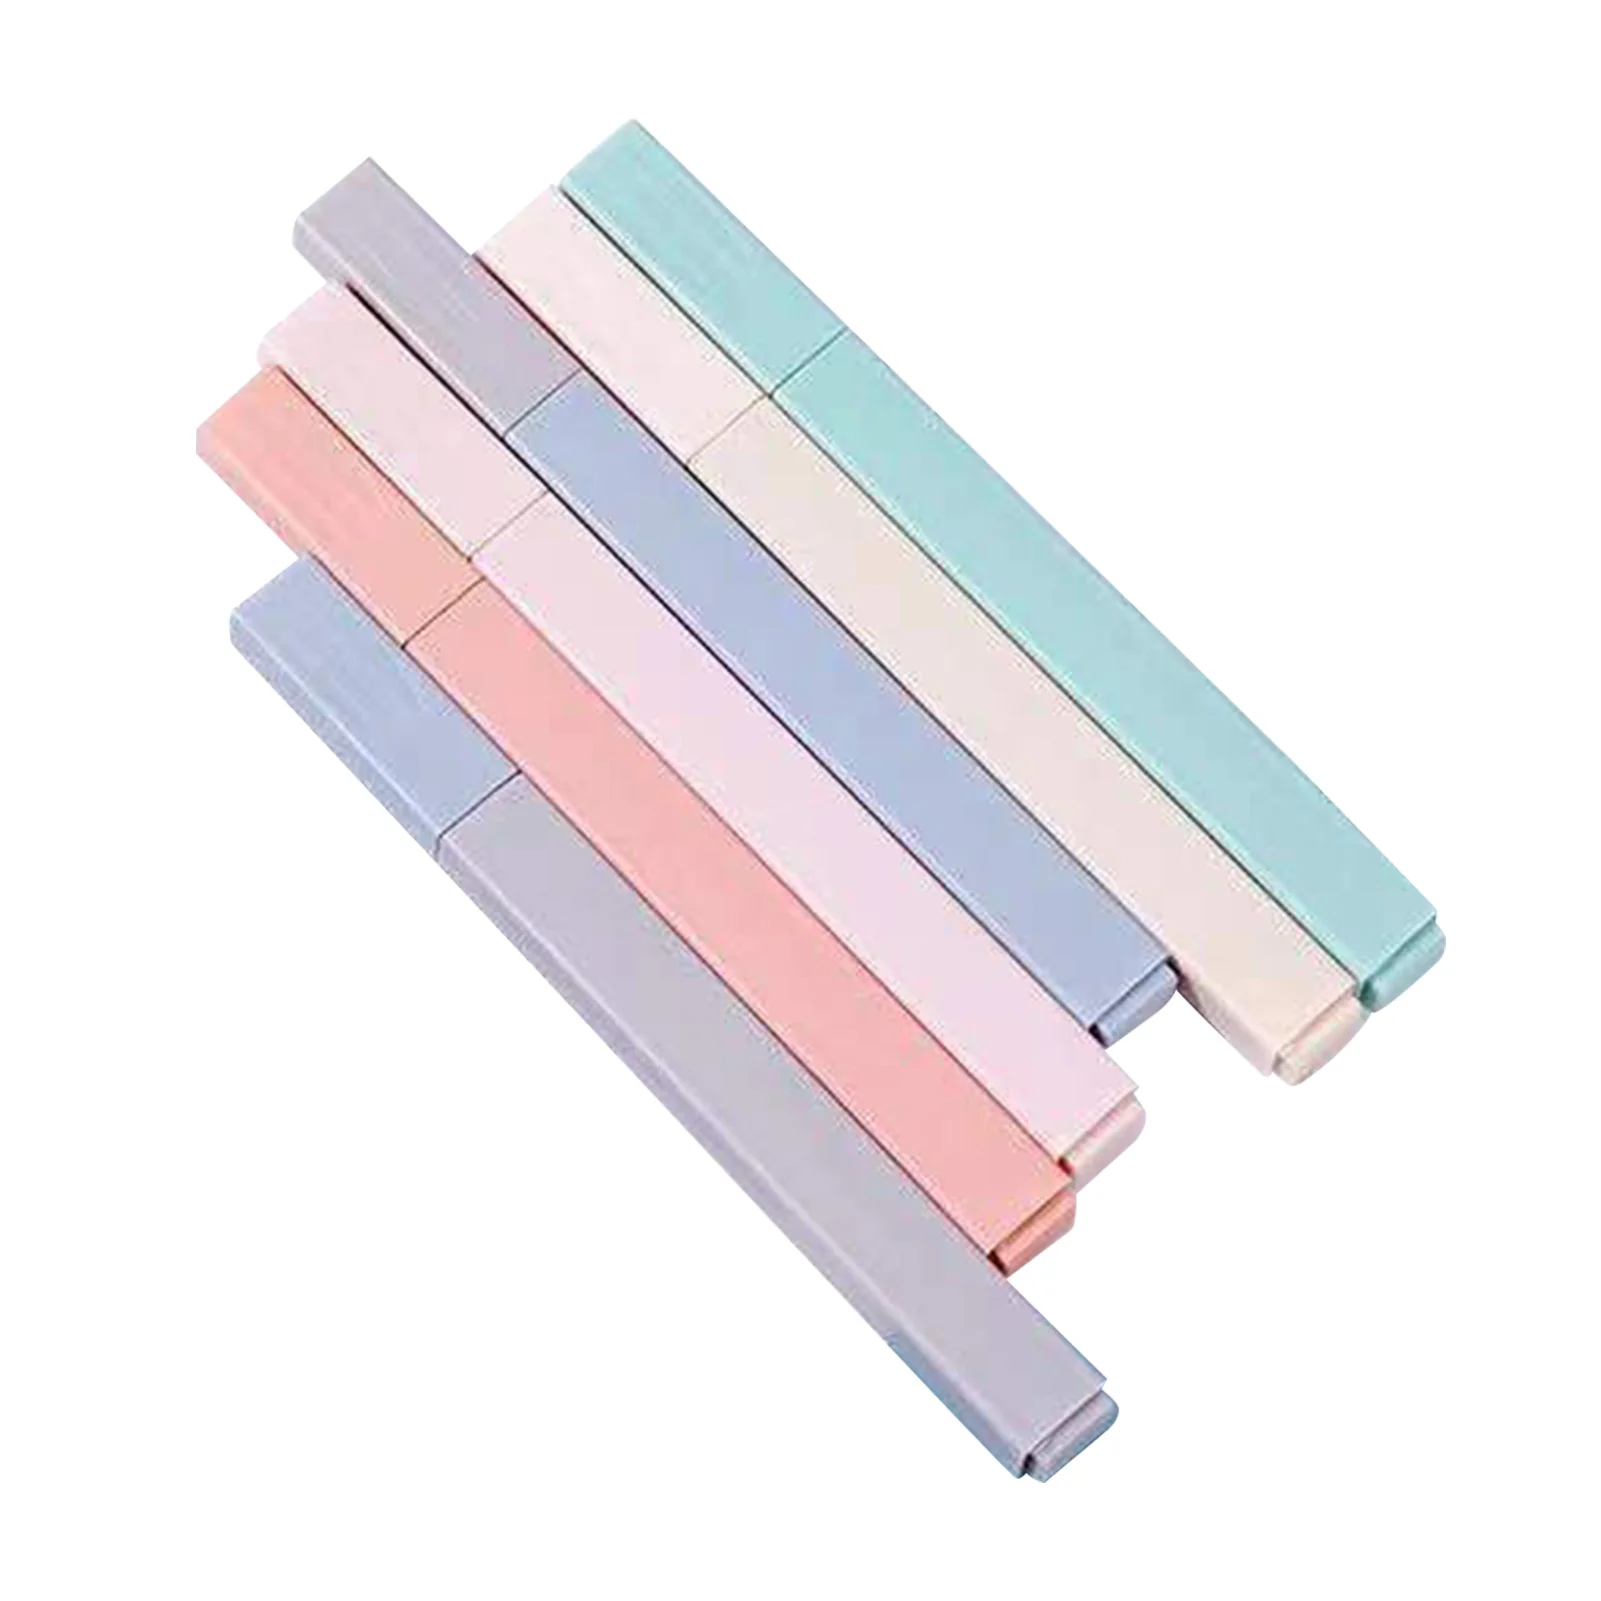 

6pcs Mild Assorted Colours Gift Aesthetic Dry Fast No Bleed Note Taking Art Marker Highlighter Pen With Chisel Tip Journal Diary